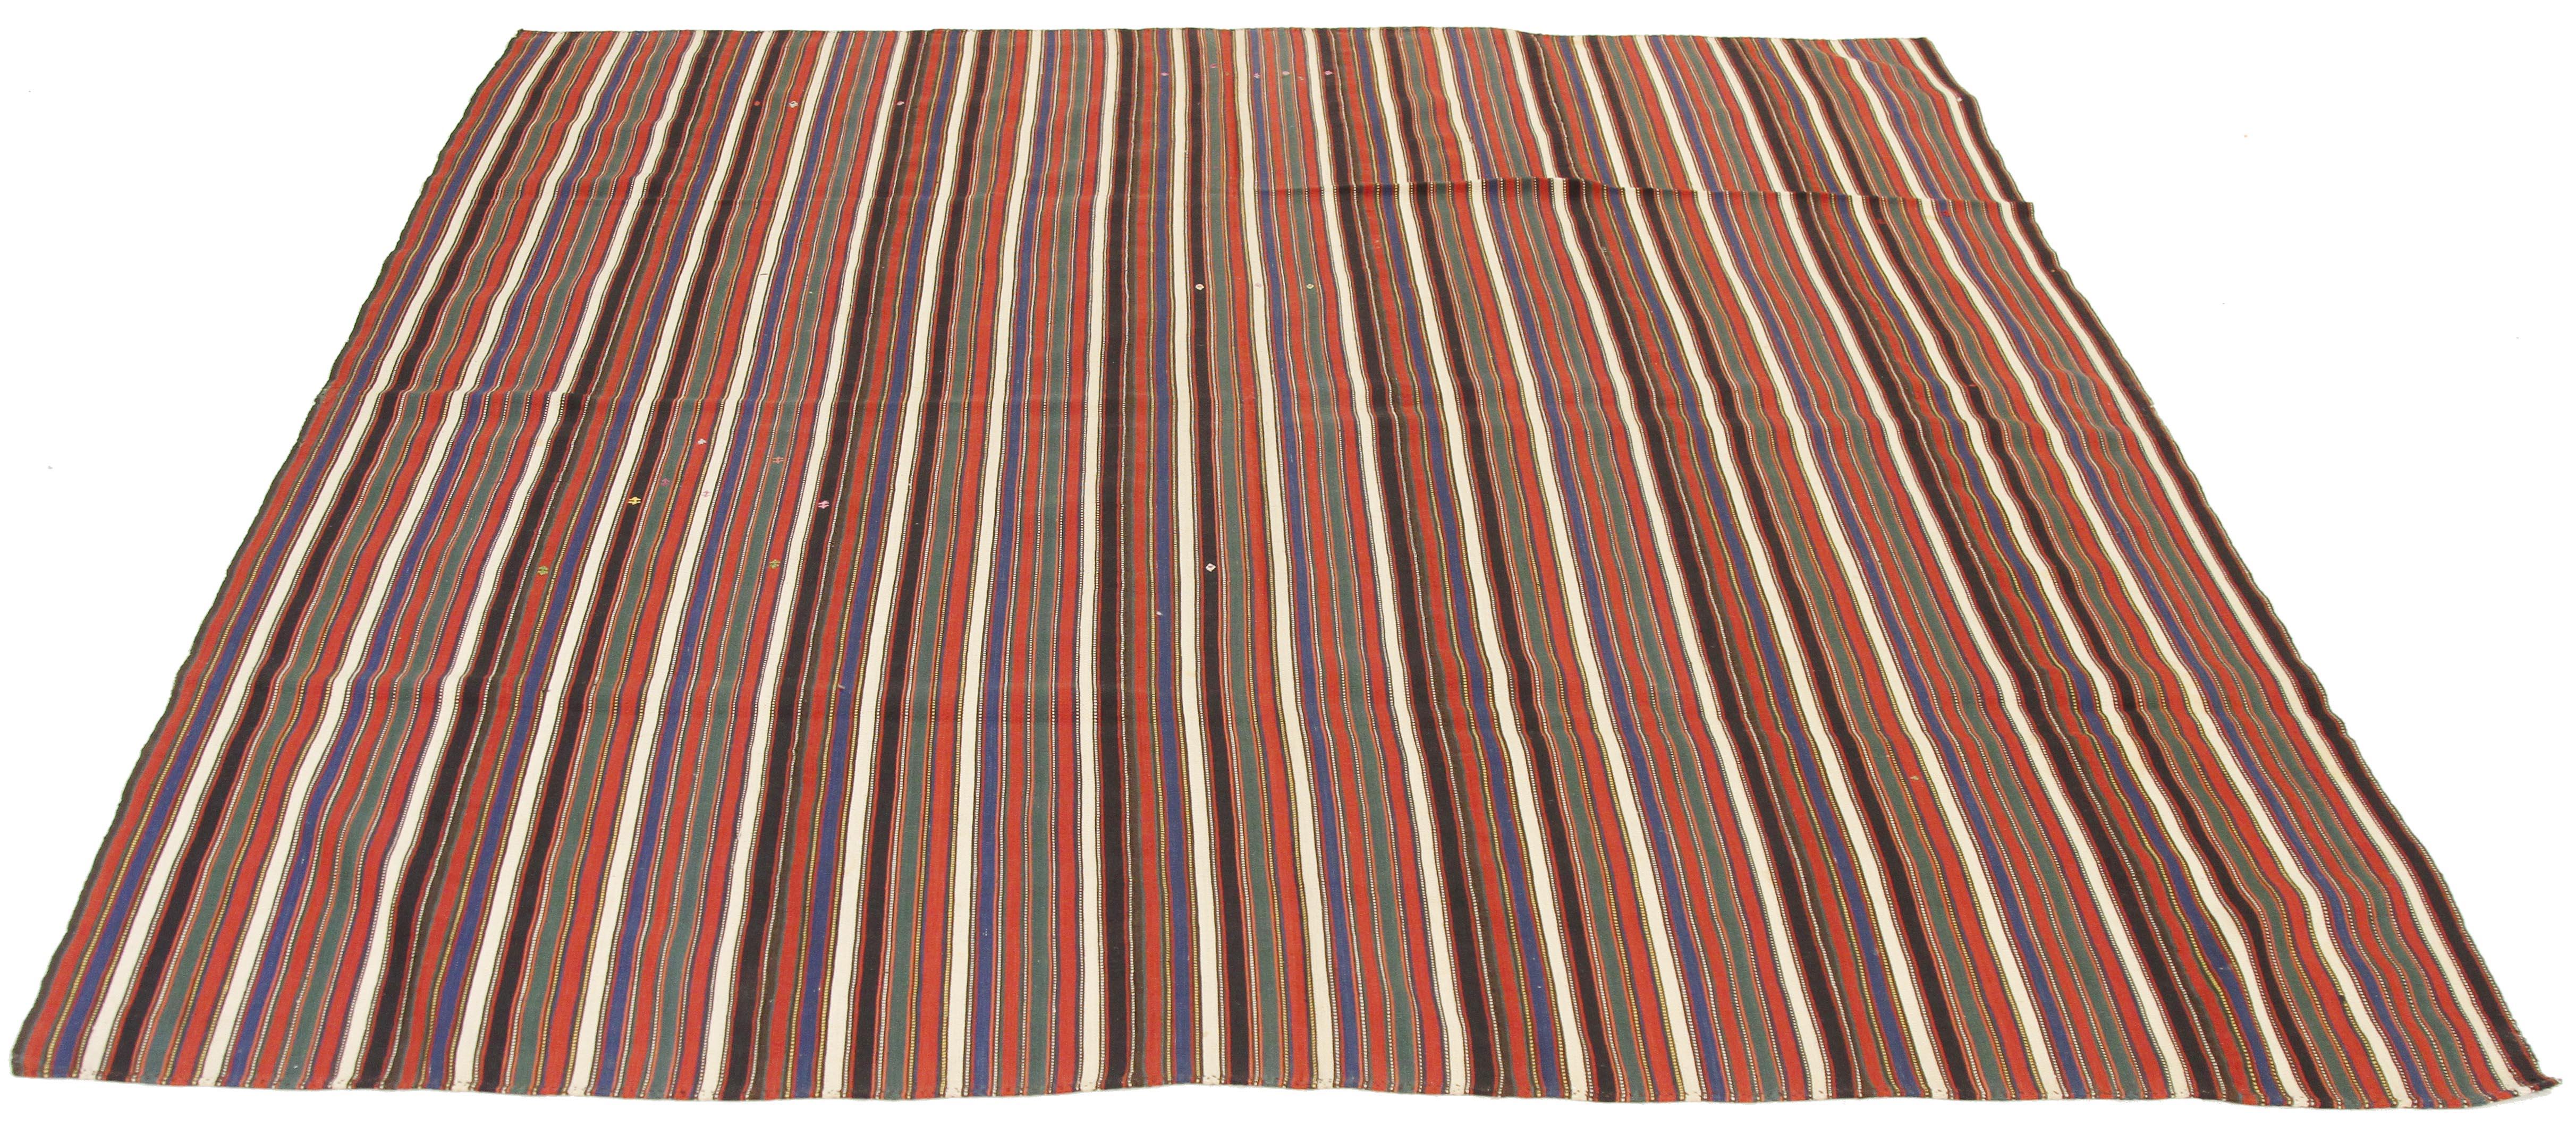 Antique Persian rug handwoven from the finest sheep’s wool and colored with all-natural vegetable dyes that are safe for humans and pets. It’s a traditional Jajim flat-weave design featuring a red, green, and blue striped field. It’s a stunning